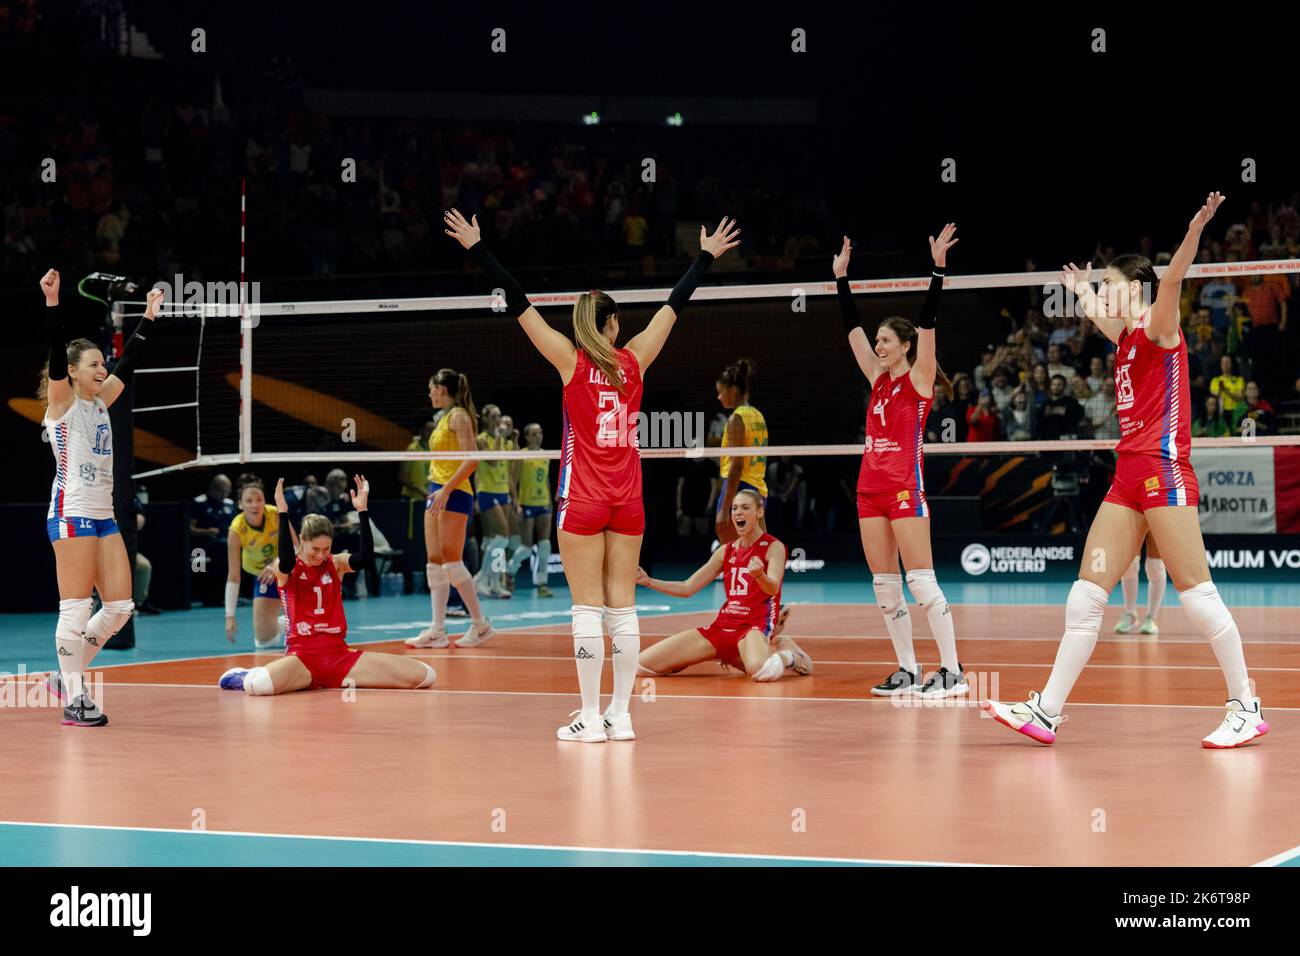 APELDOORN - Serbia wins the final of the Volleyball World Cup in Omnisport Apeldoorn. They won the last game against Brazil. ANP SANDER KING Stock Photo